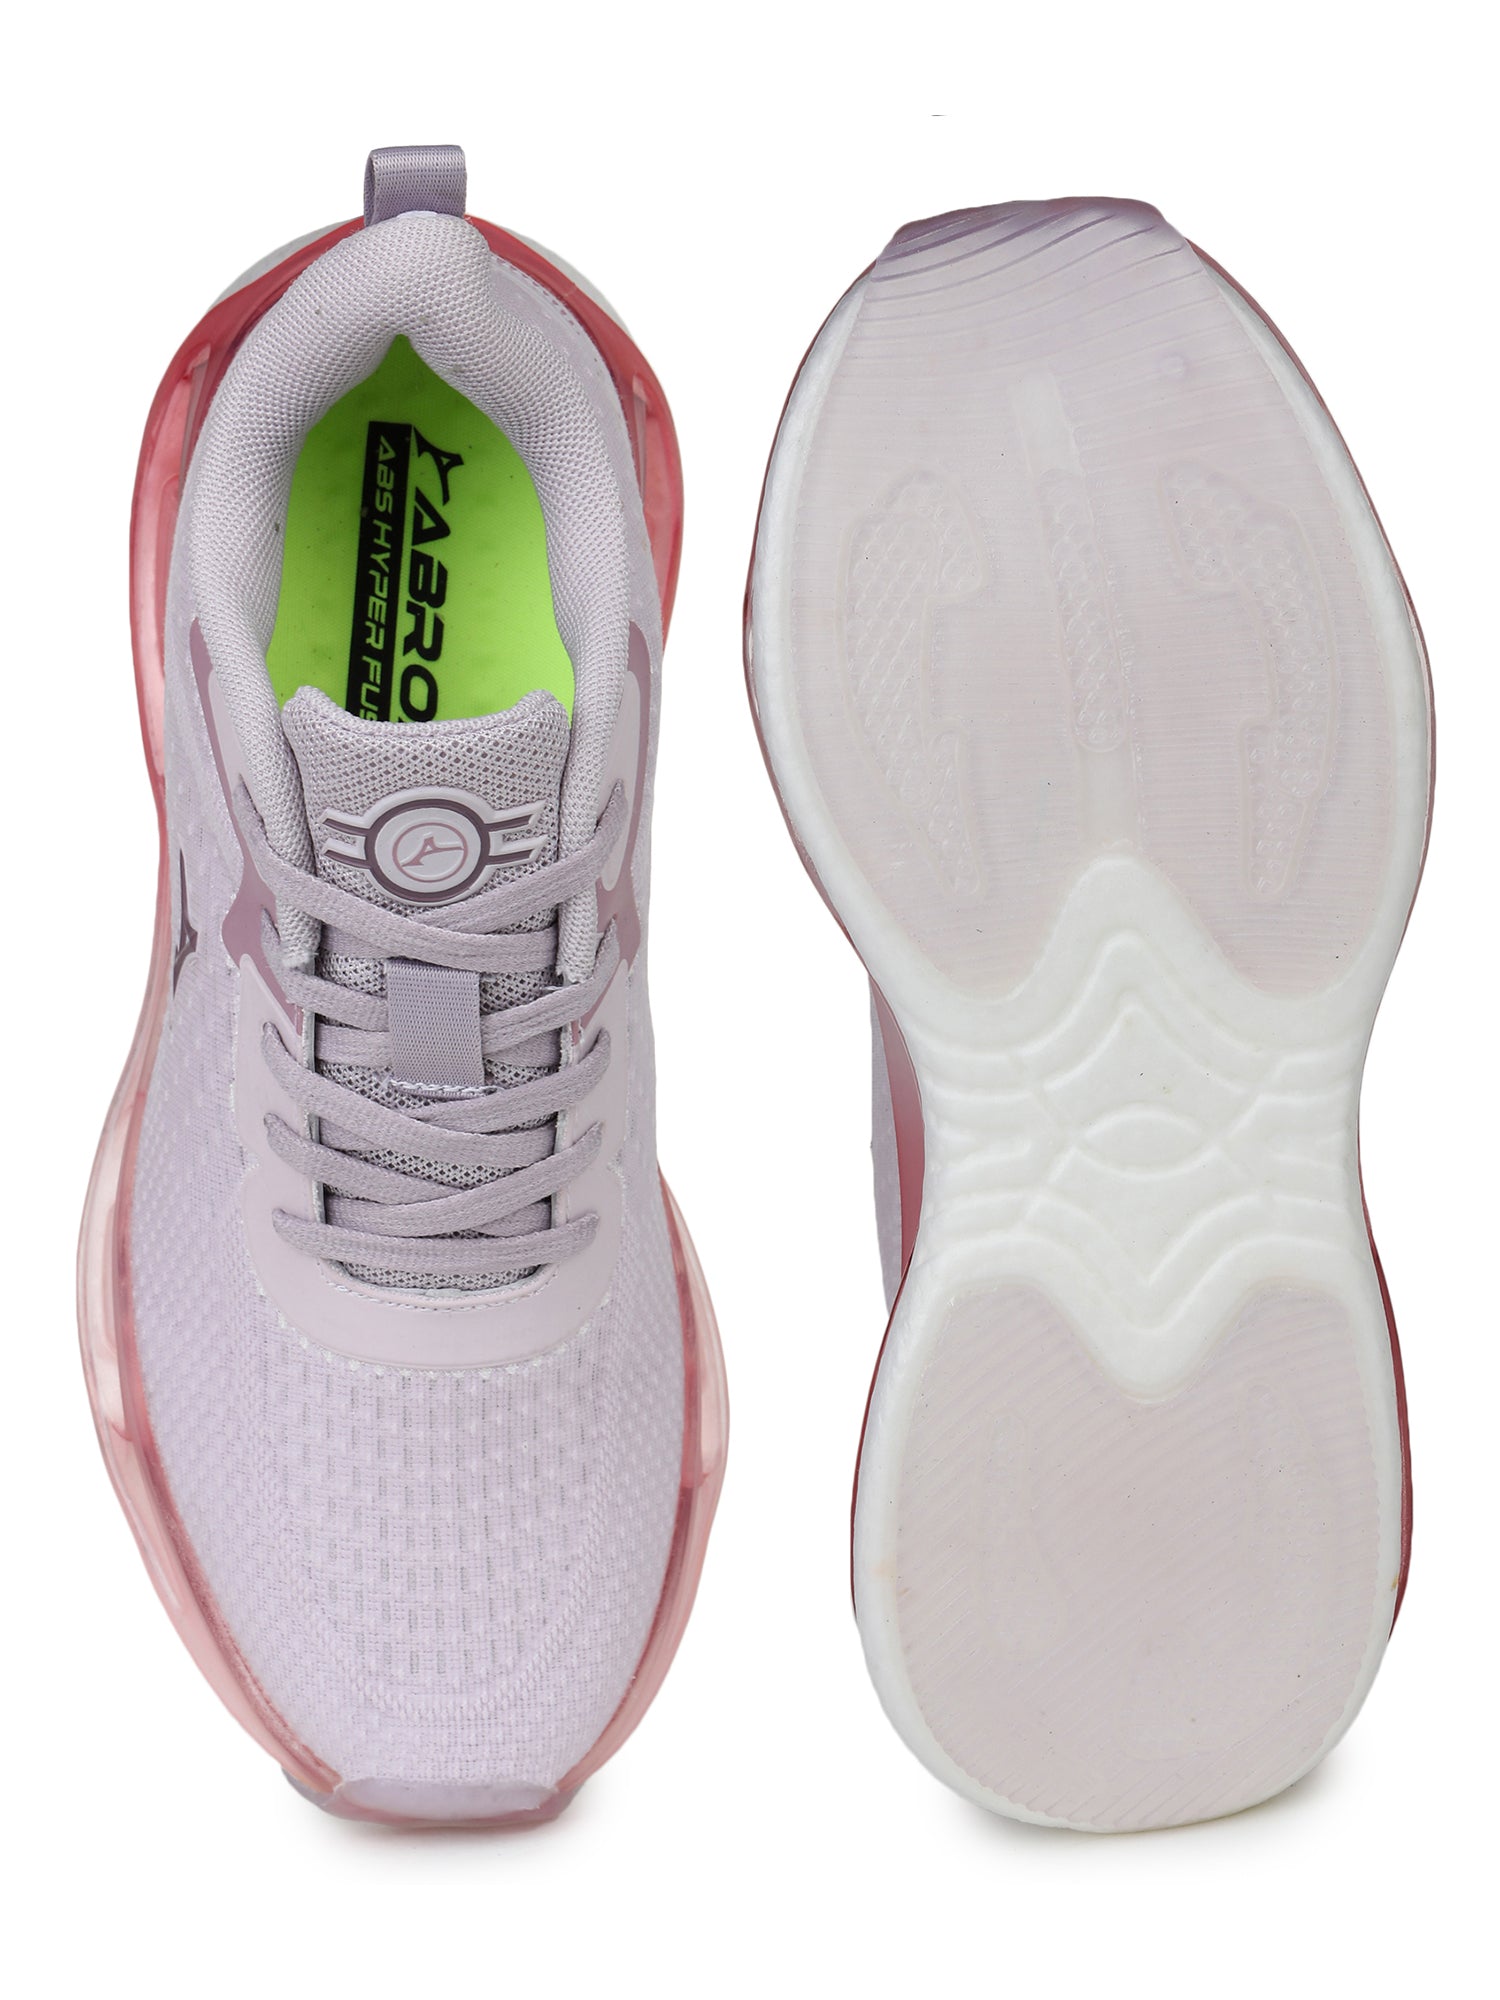 VERNA SPORTS SHOES FOR WOMEN